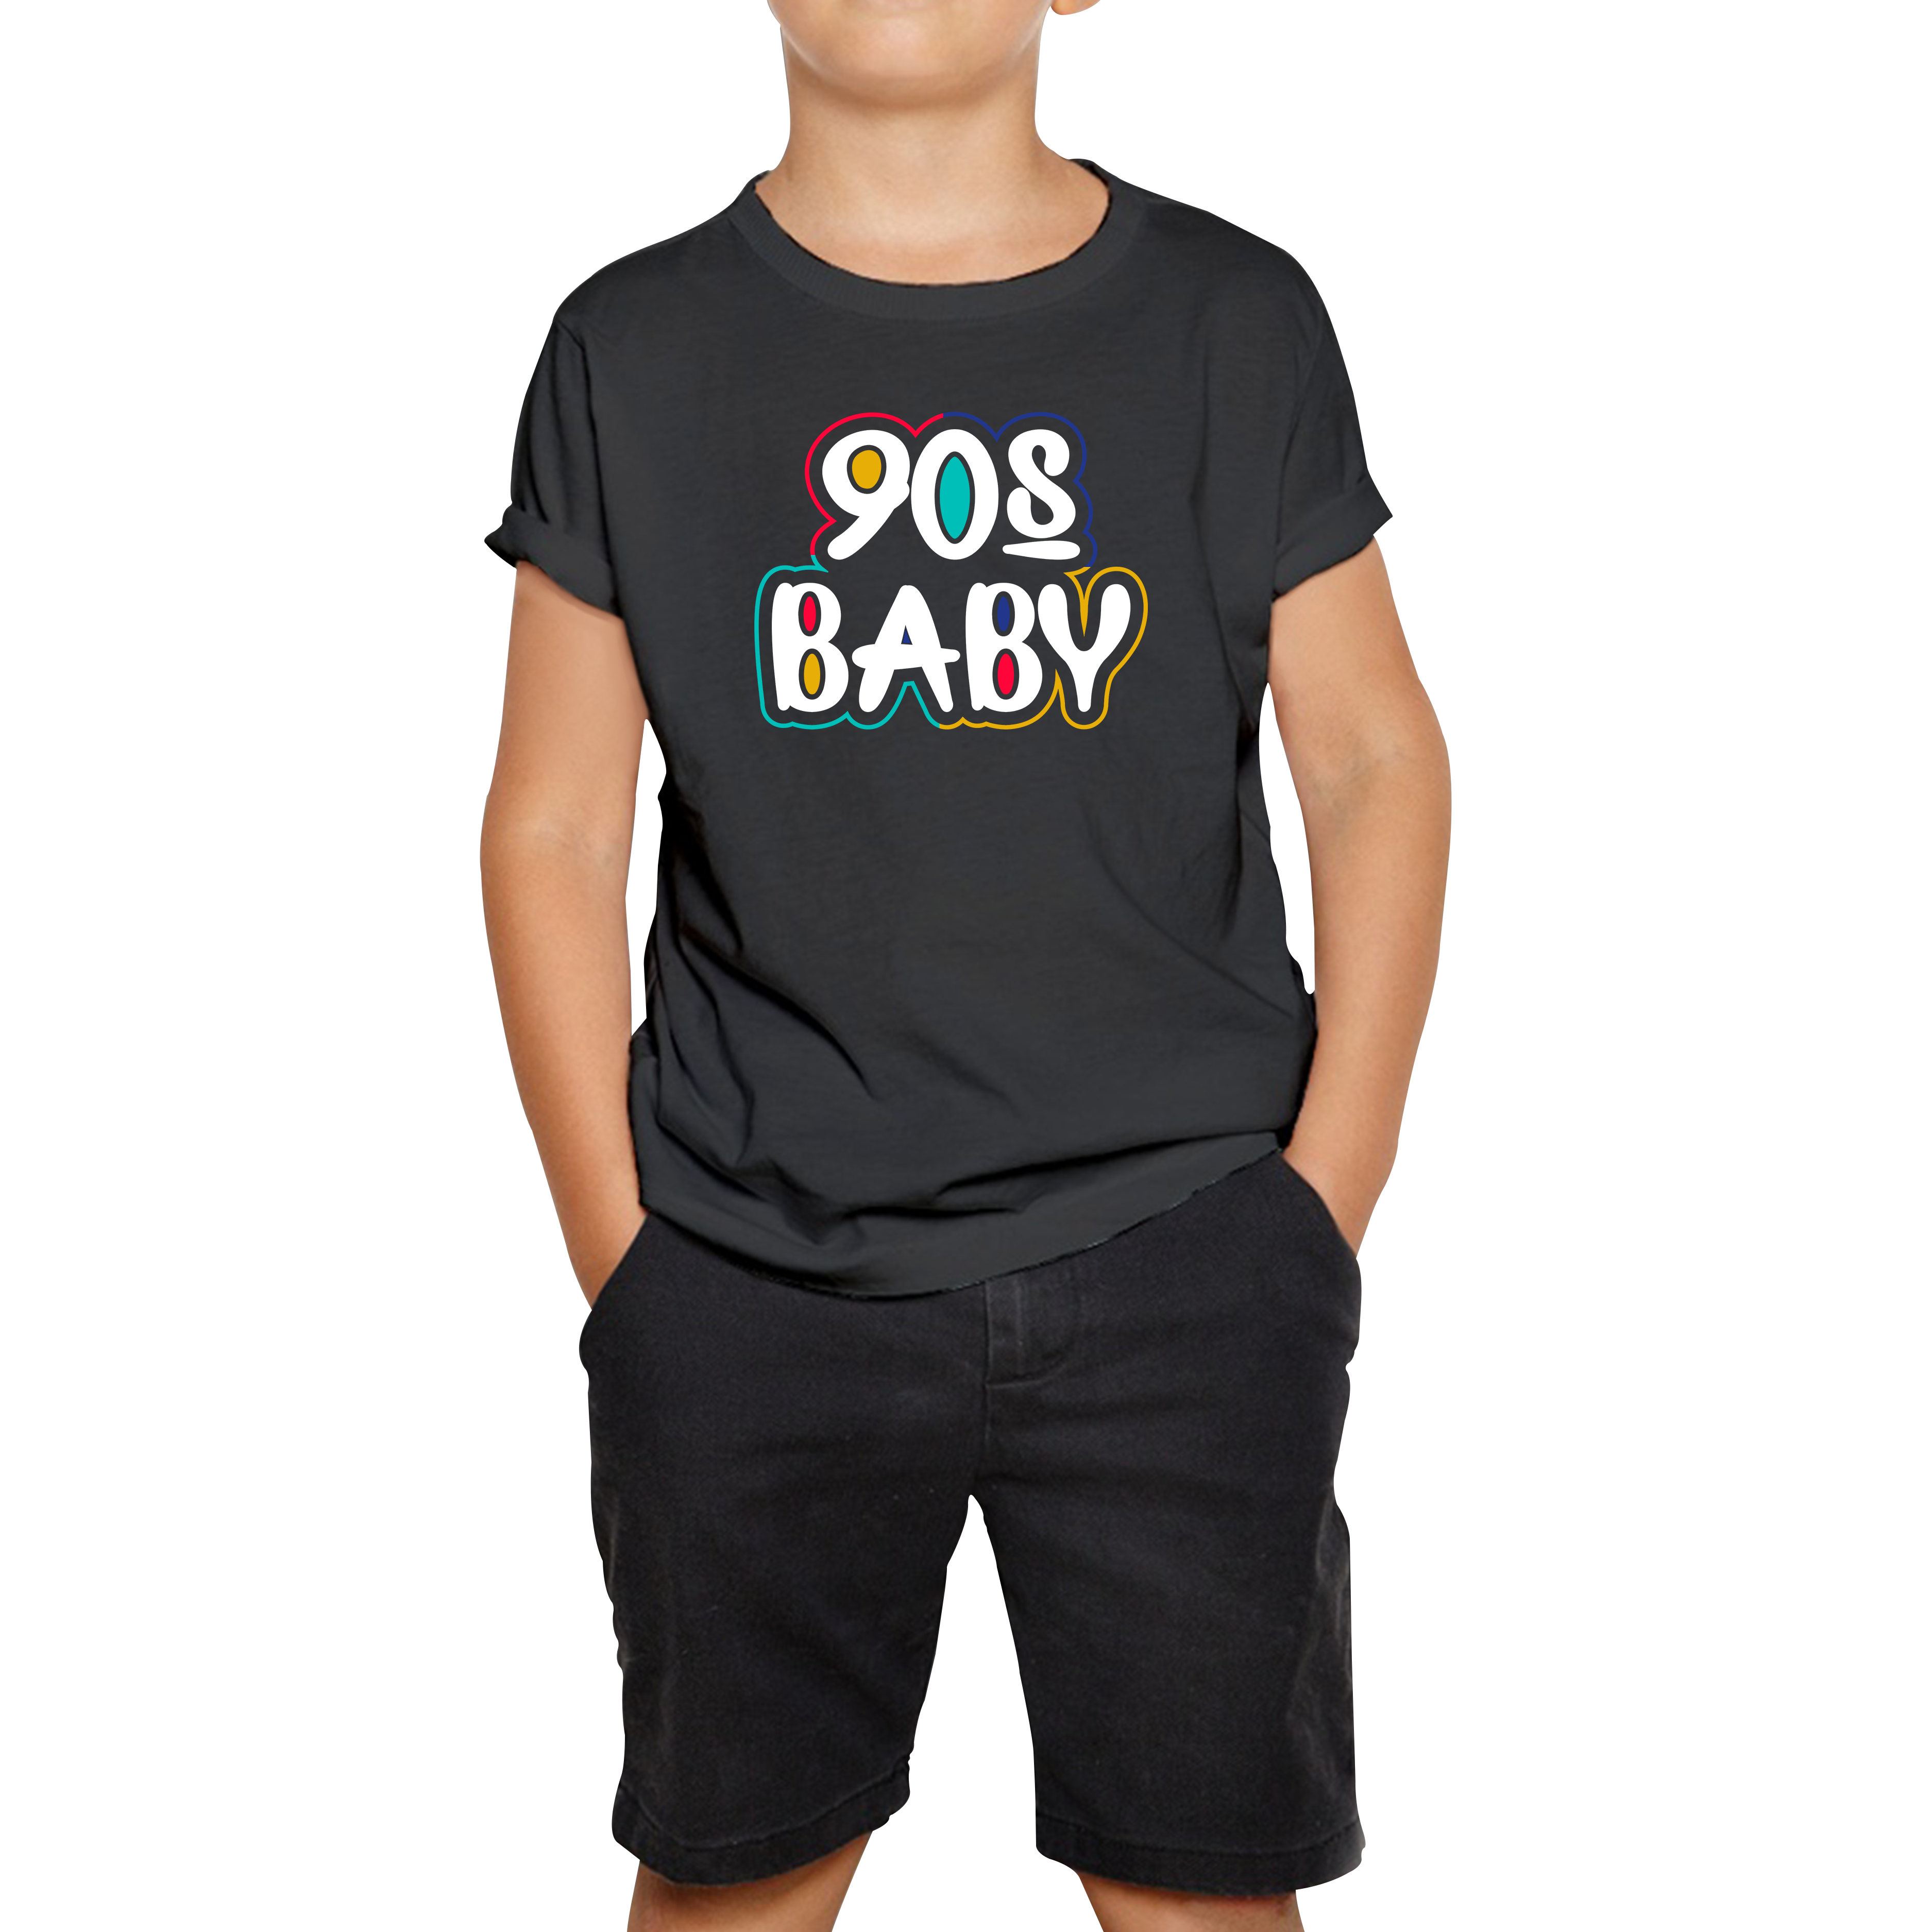 90s Baby T-Shirt Awesome cool 90's baby fashion Vintag Funny Joke Novelty Design Kids Tee